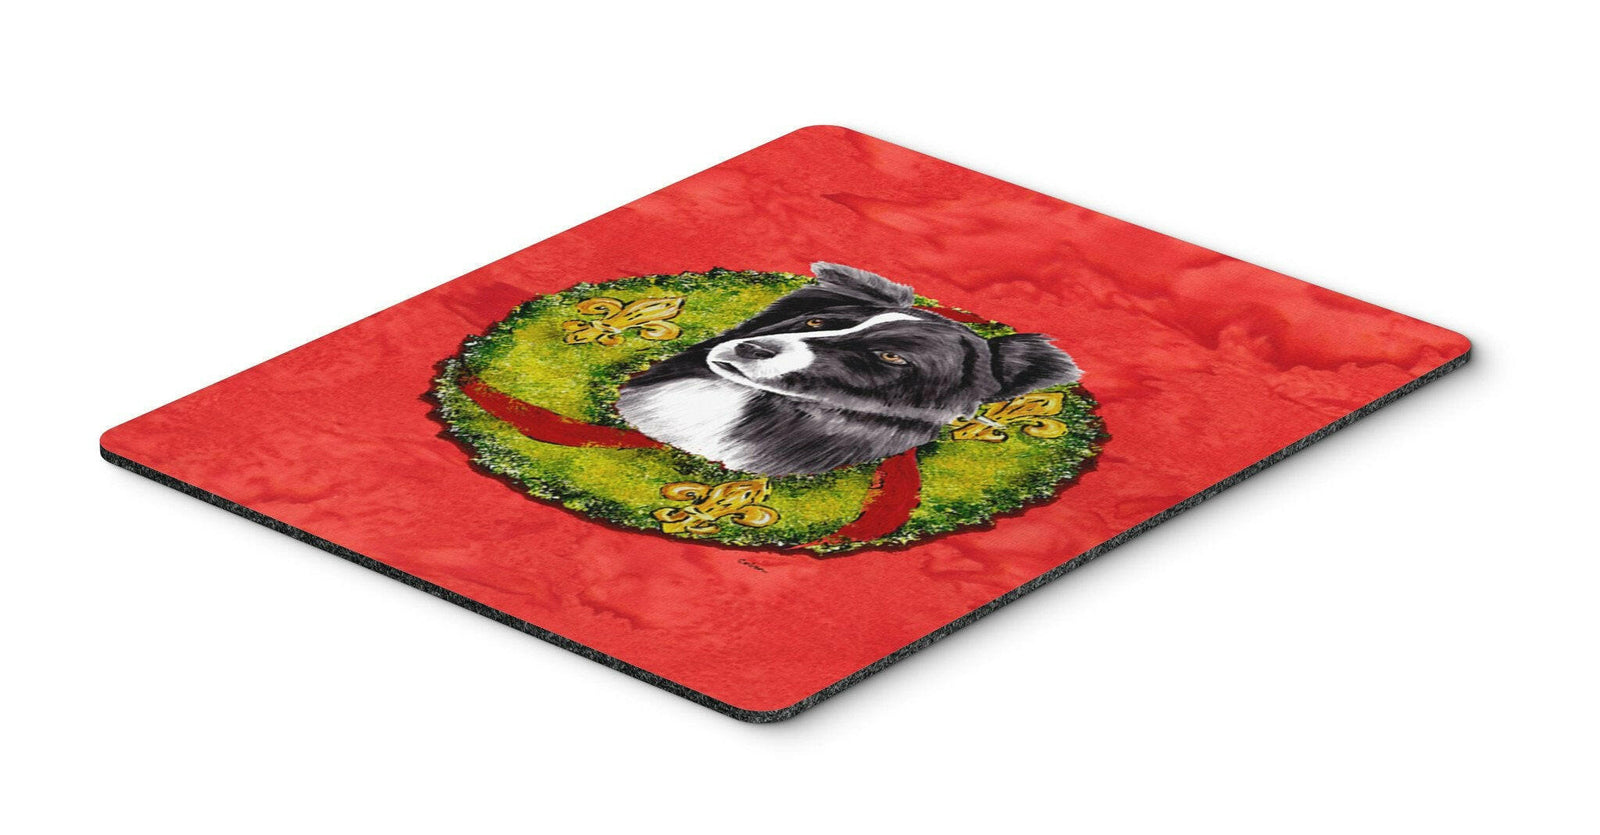 Border Collie Mouse Pad, Hot Pad or Trivet by Caroline's Treasures